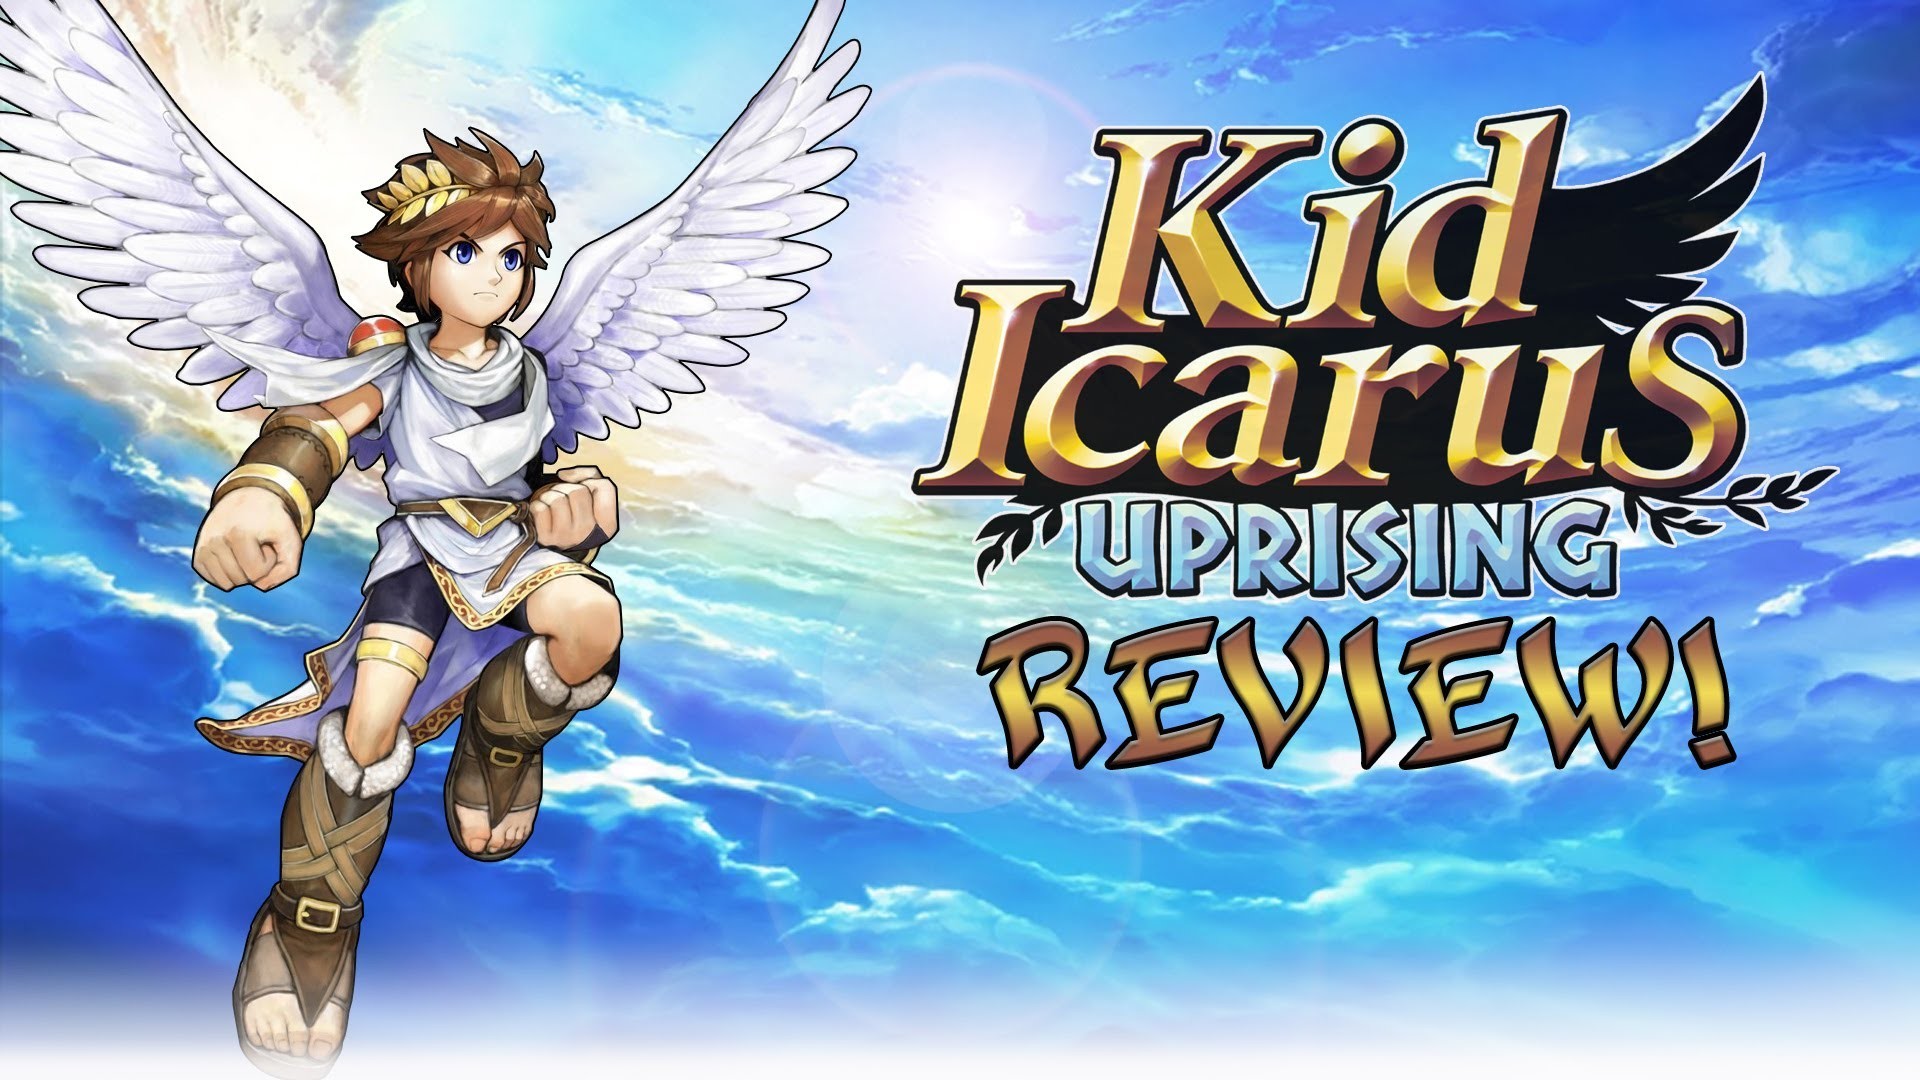 1920x1080 Kid Icarus Uprising Review